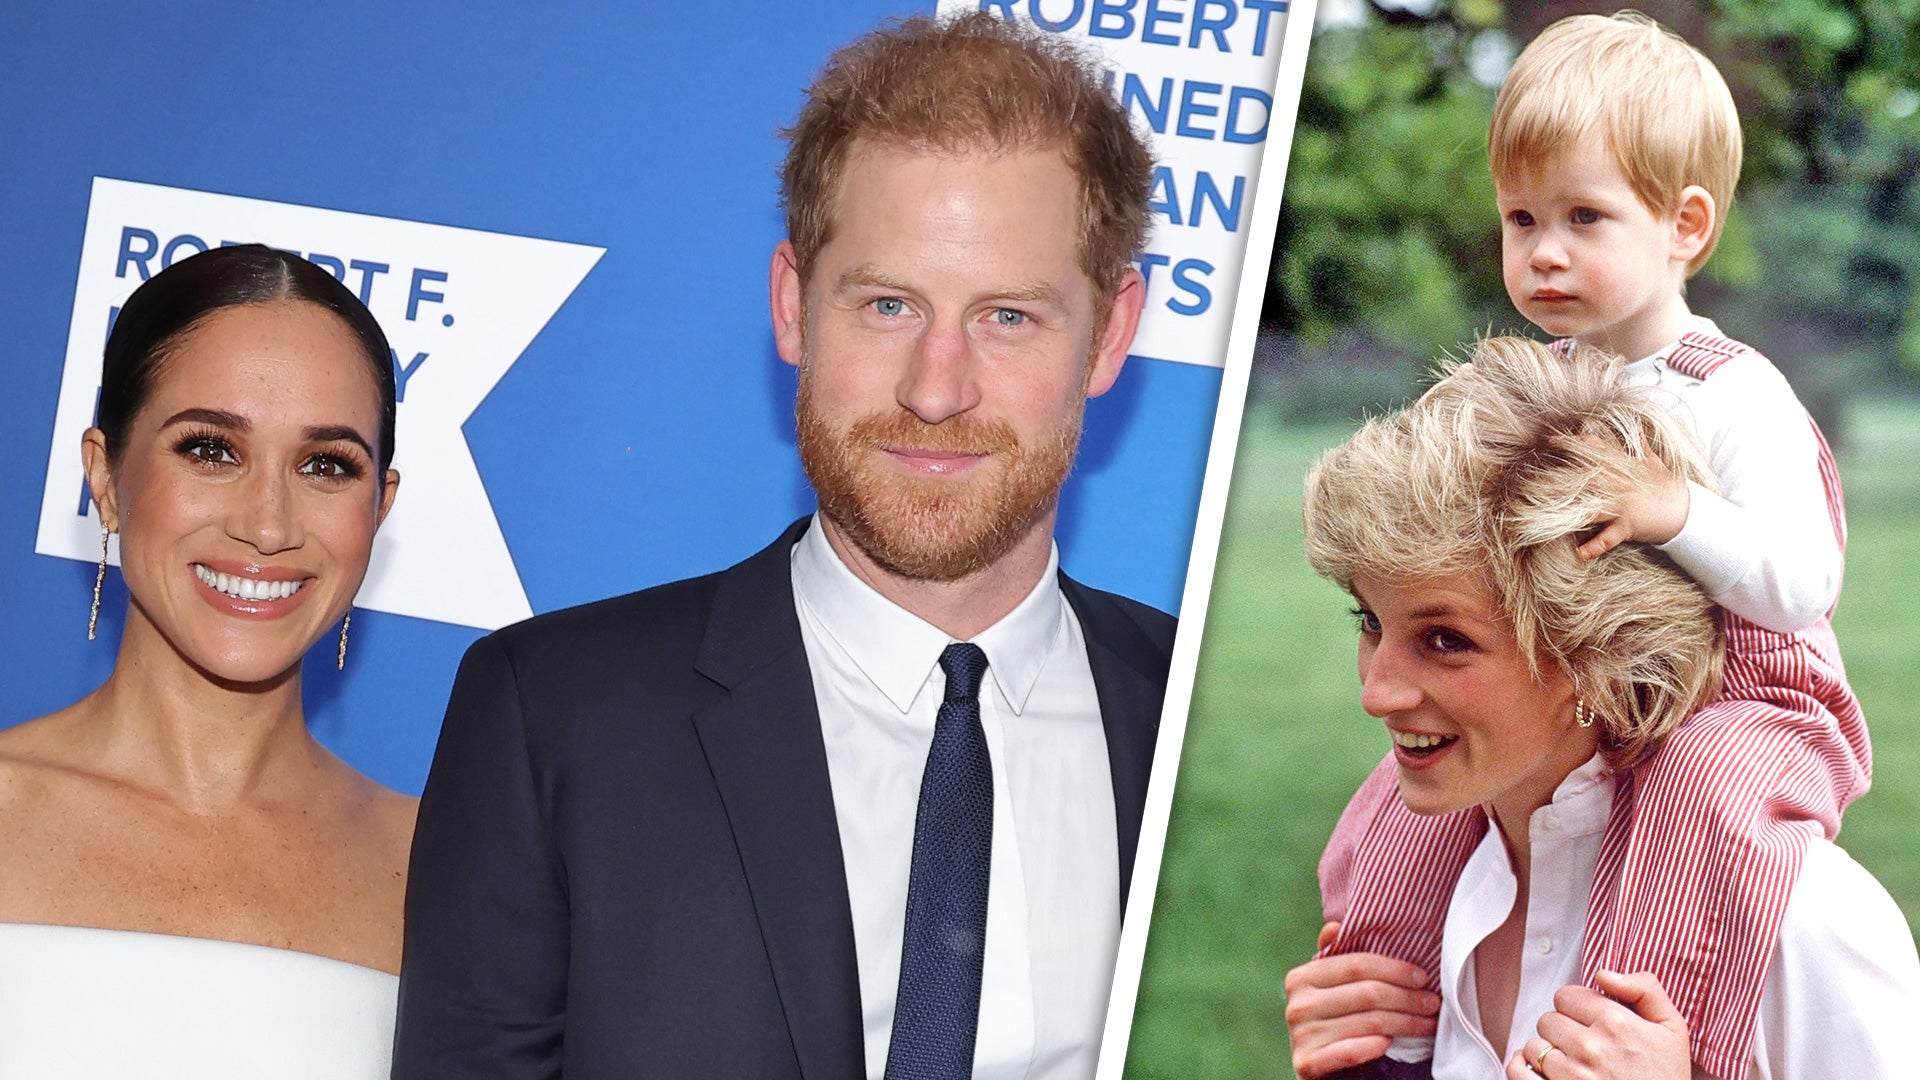 Prince Harry Compares Meghan Markle to His Late Mother, Princess Diana